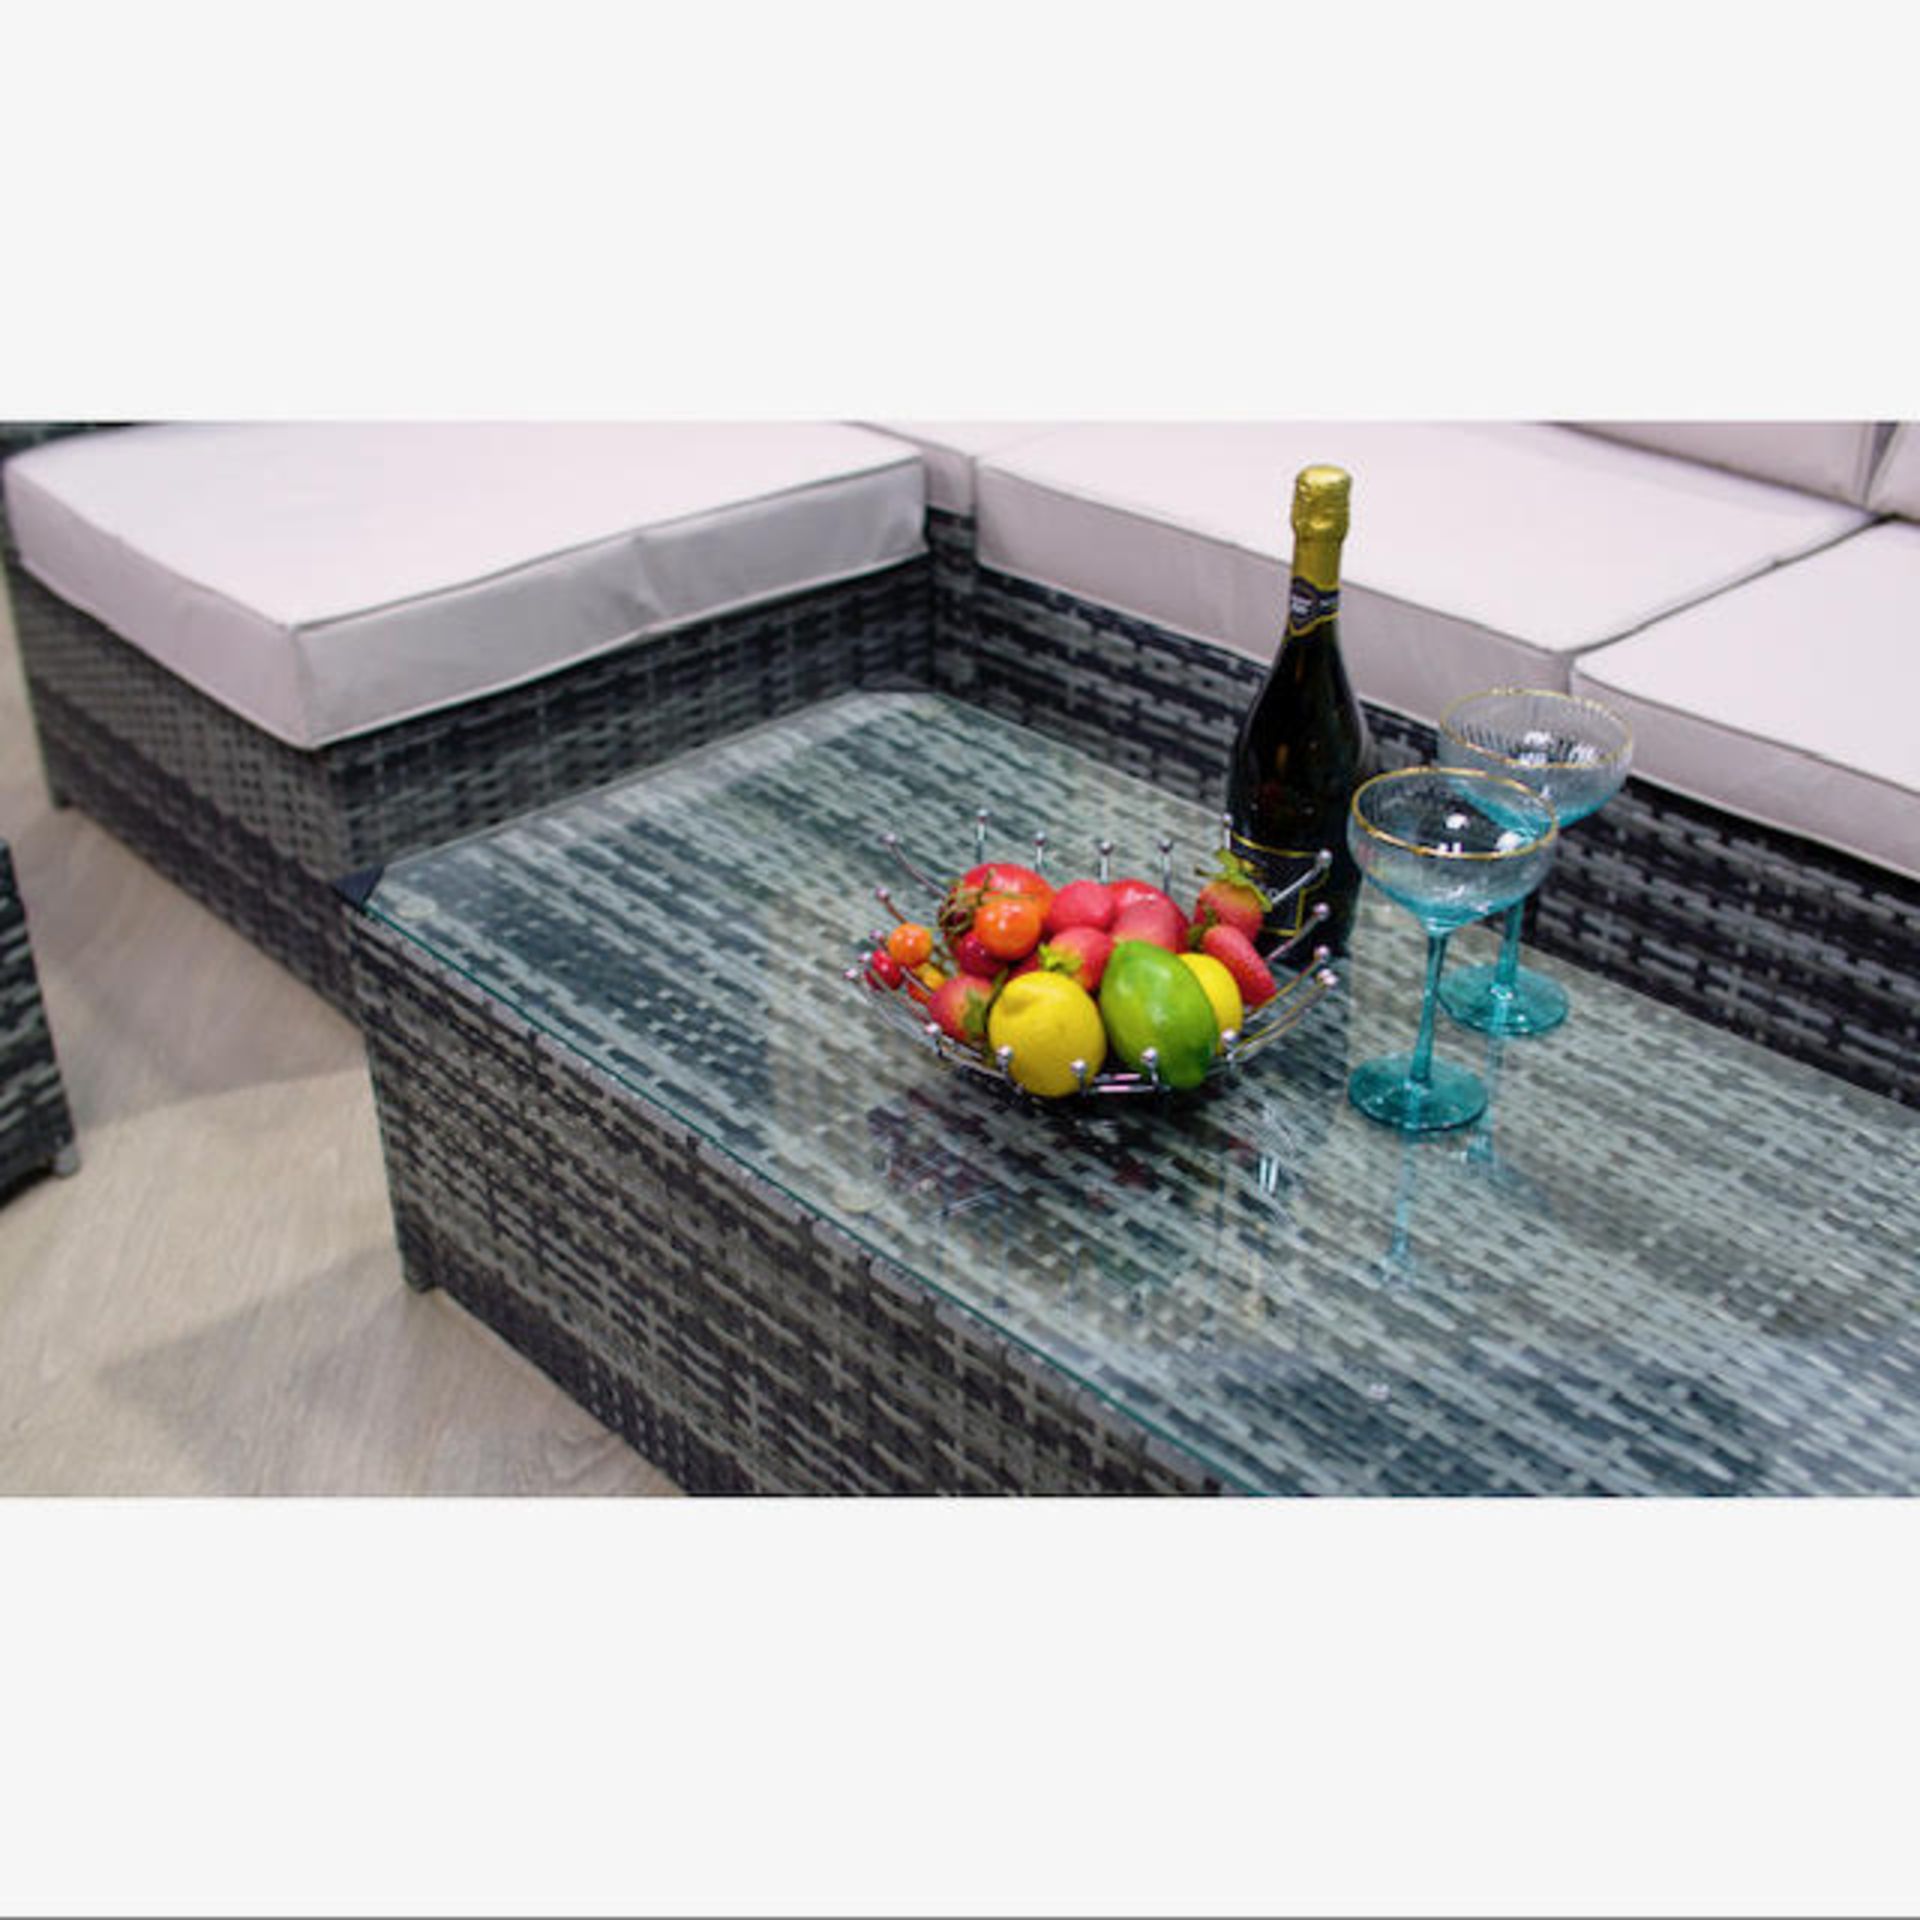 BRAND NEW LINEA 7 PIECE LUXURY RATTAN SETS RRP £1499 EACH. PERFECT FOR THOSE SUMMER NIGHTS FOR - Image 6 of 6